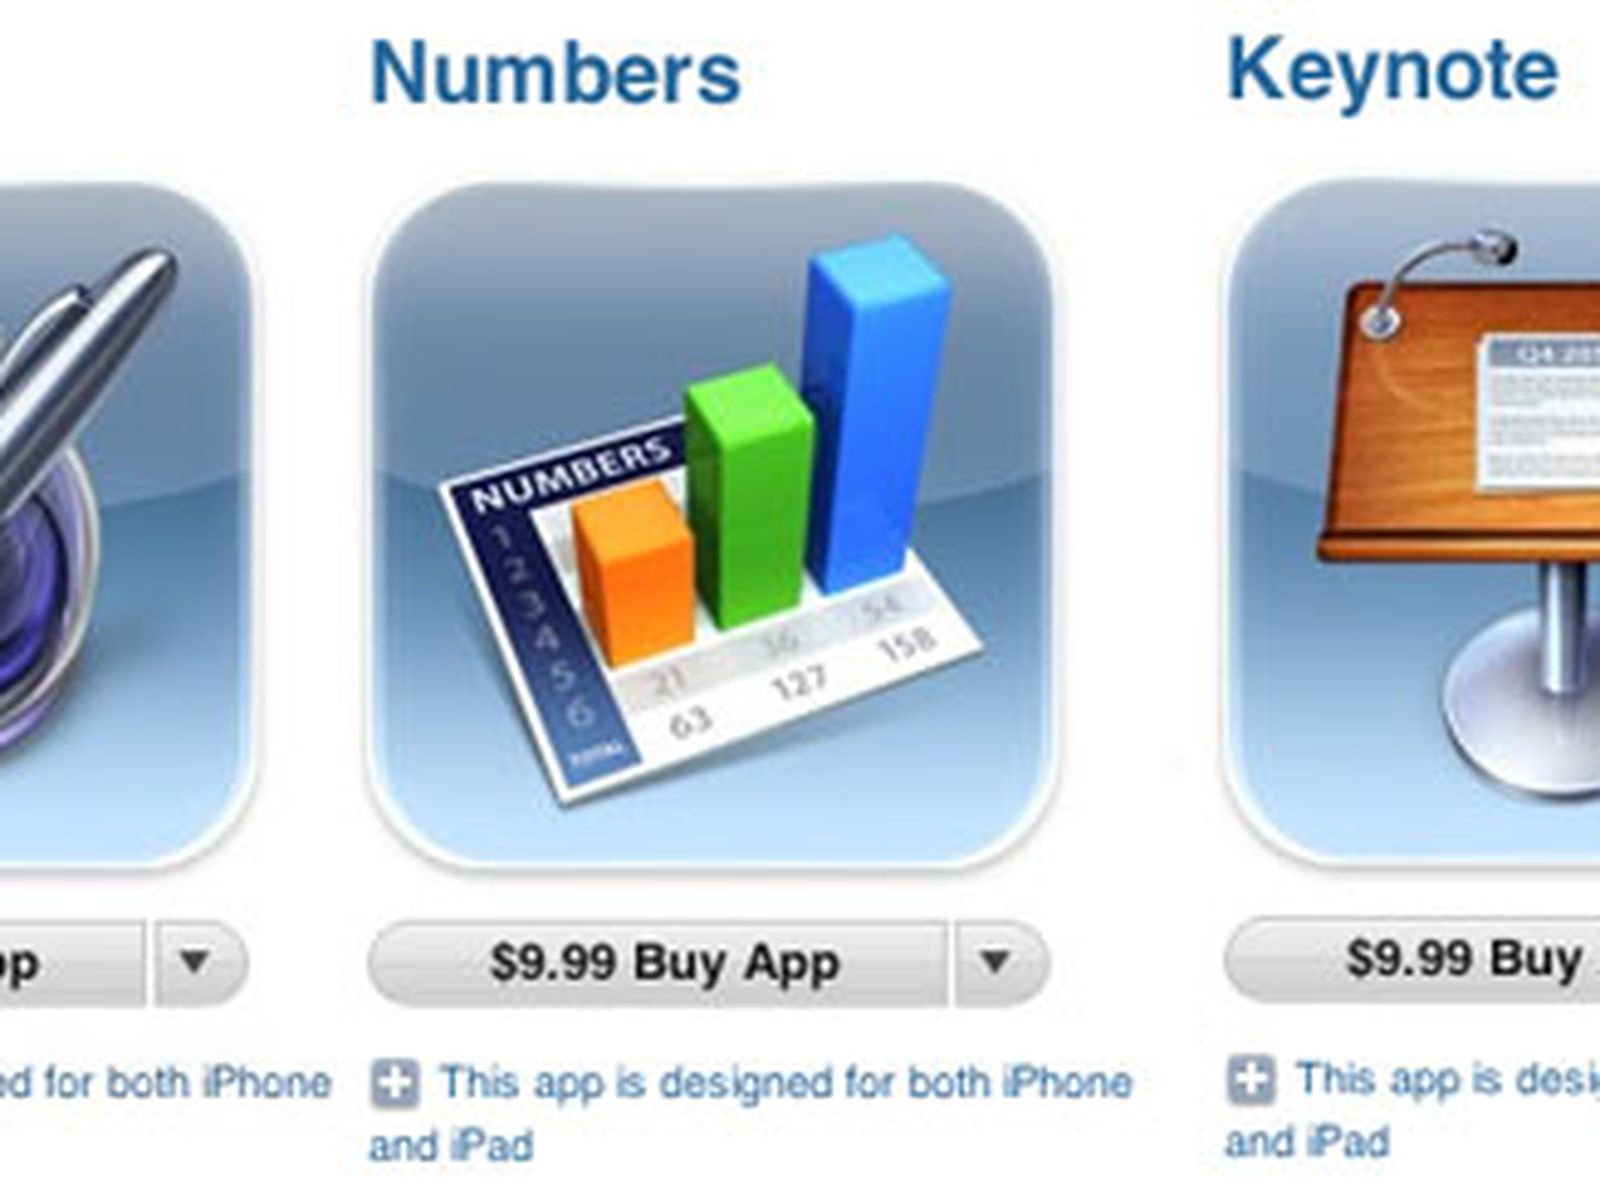 Apple Launches iWork Office Suite for iPhone and iPod Touch - MacRumors